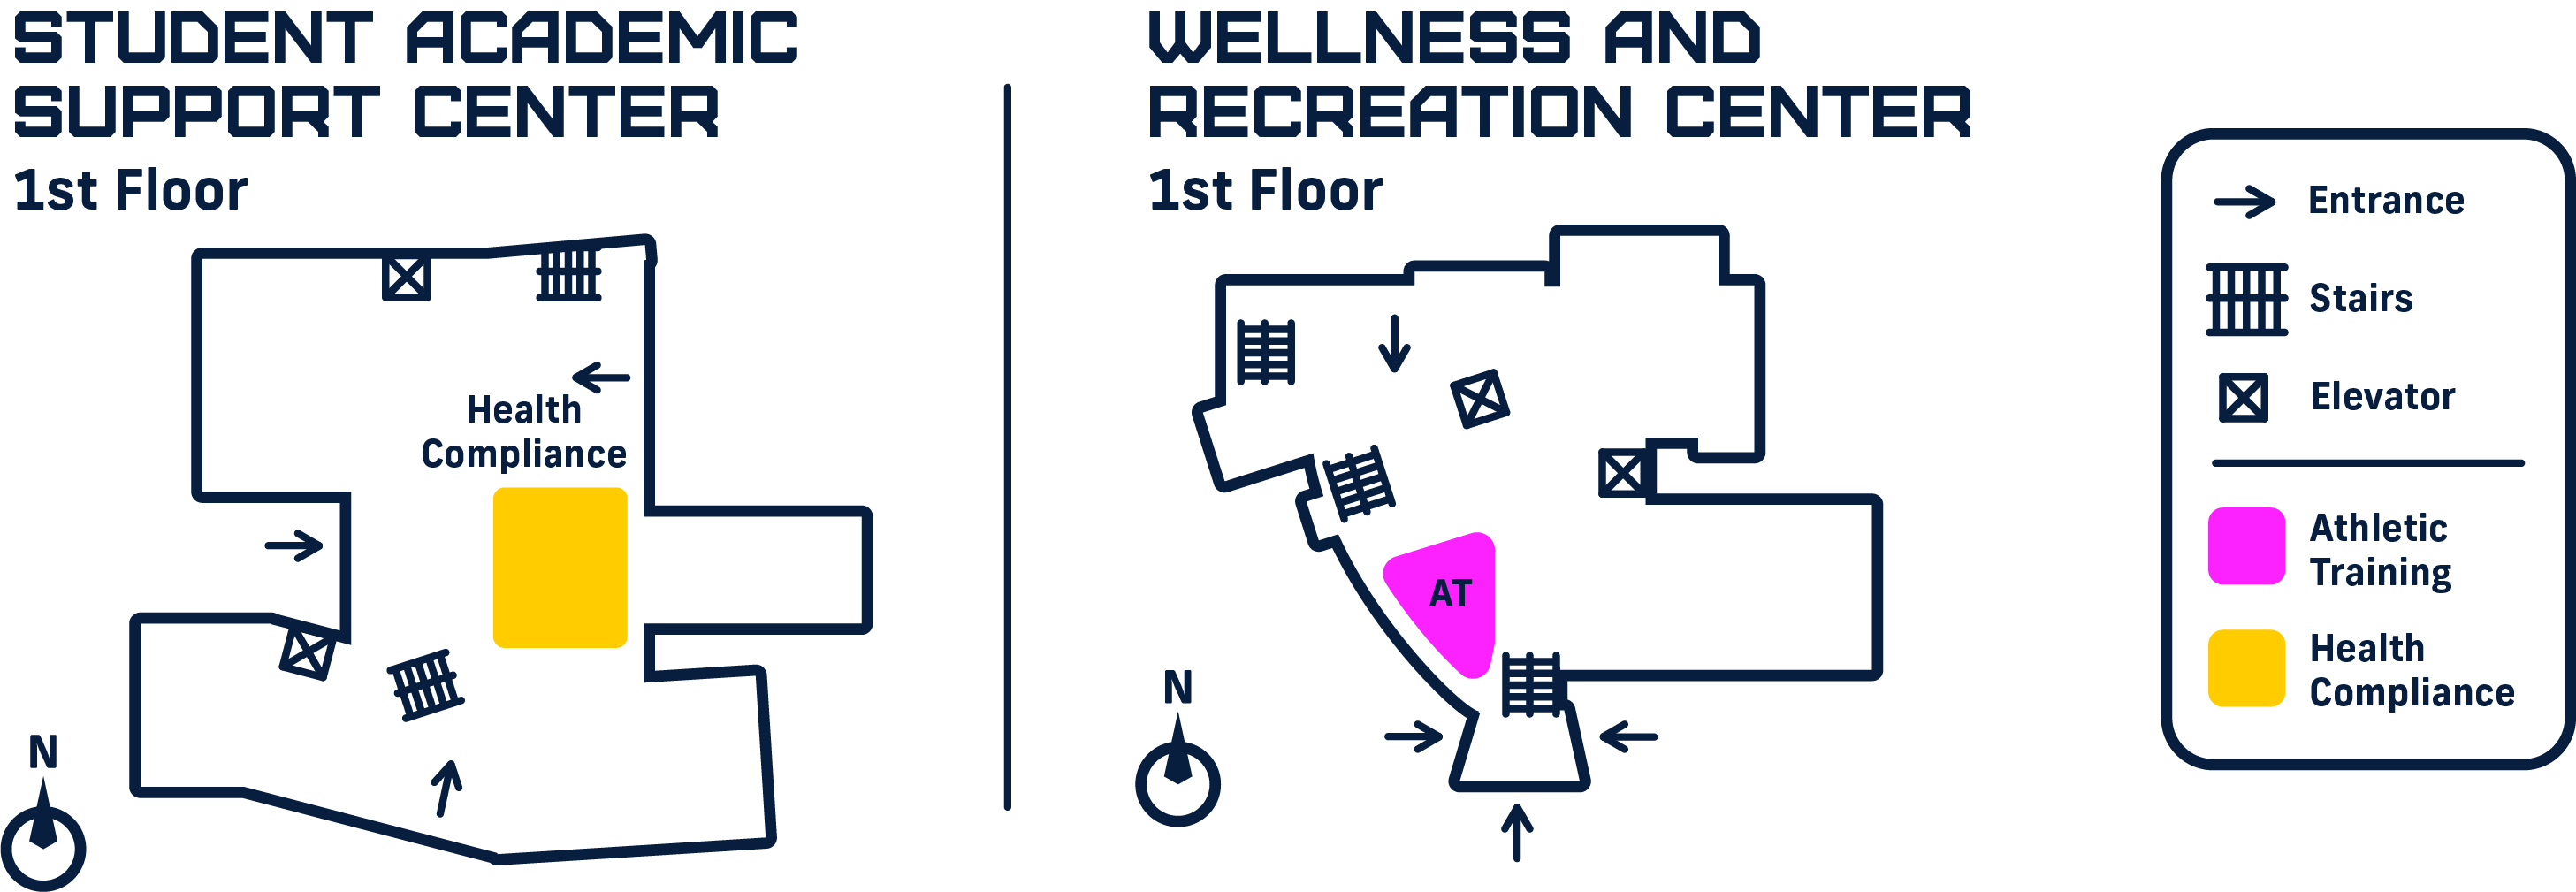 Map of the Student Academic Support Center and the Wellness and Recreation Center at MMC